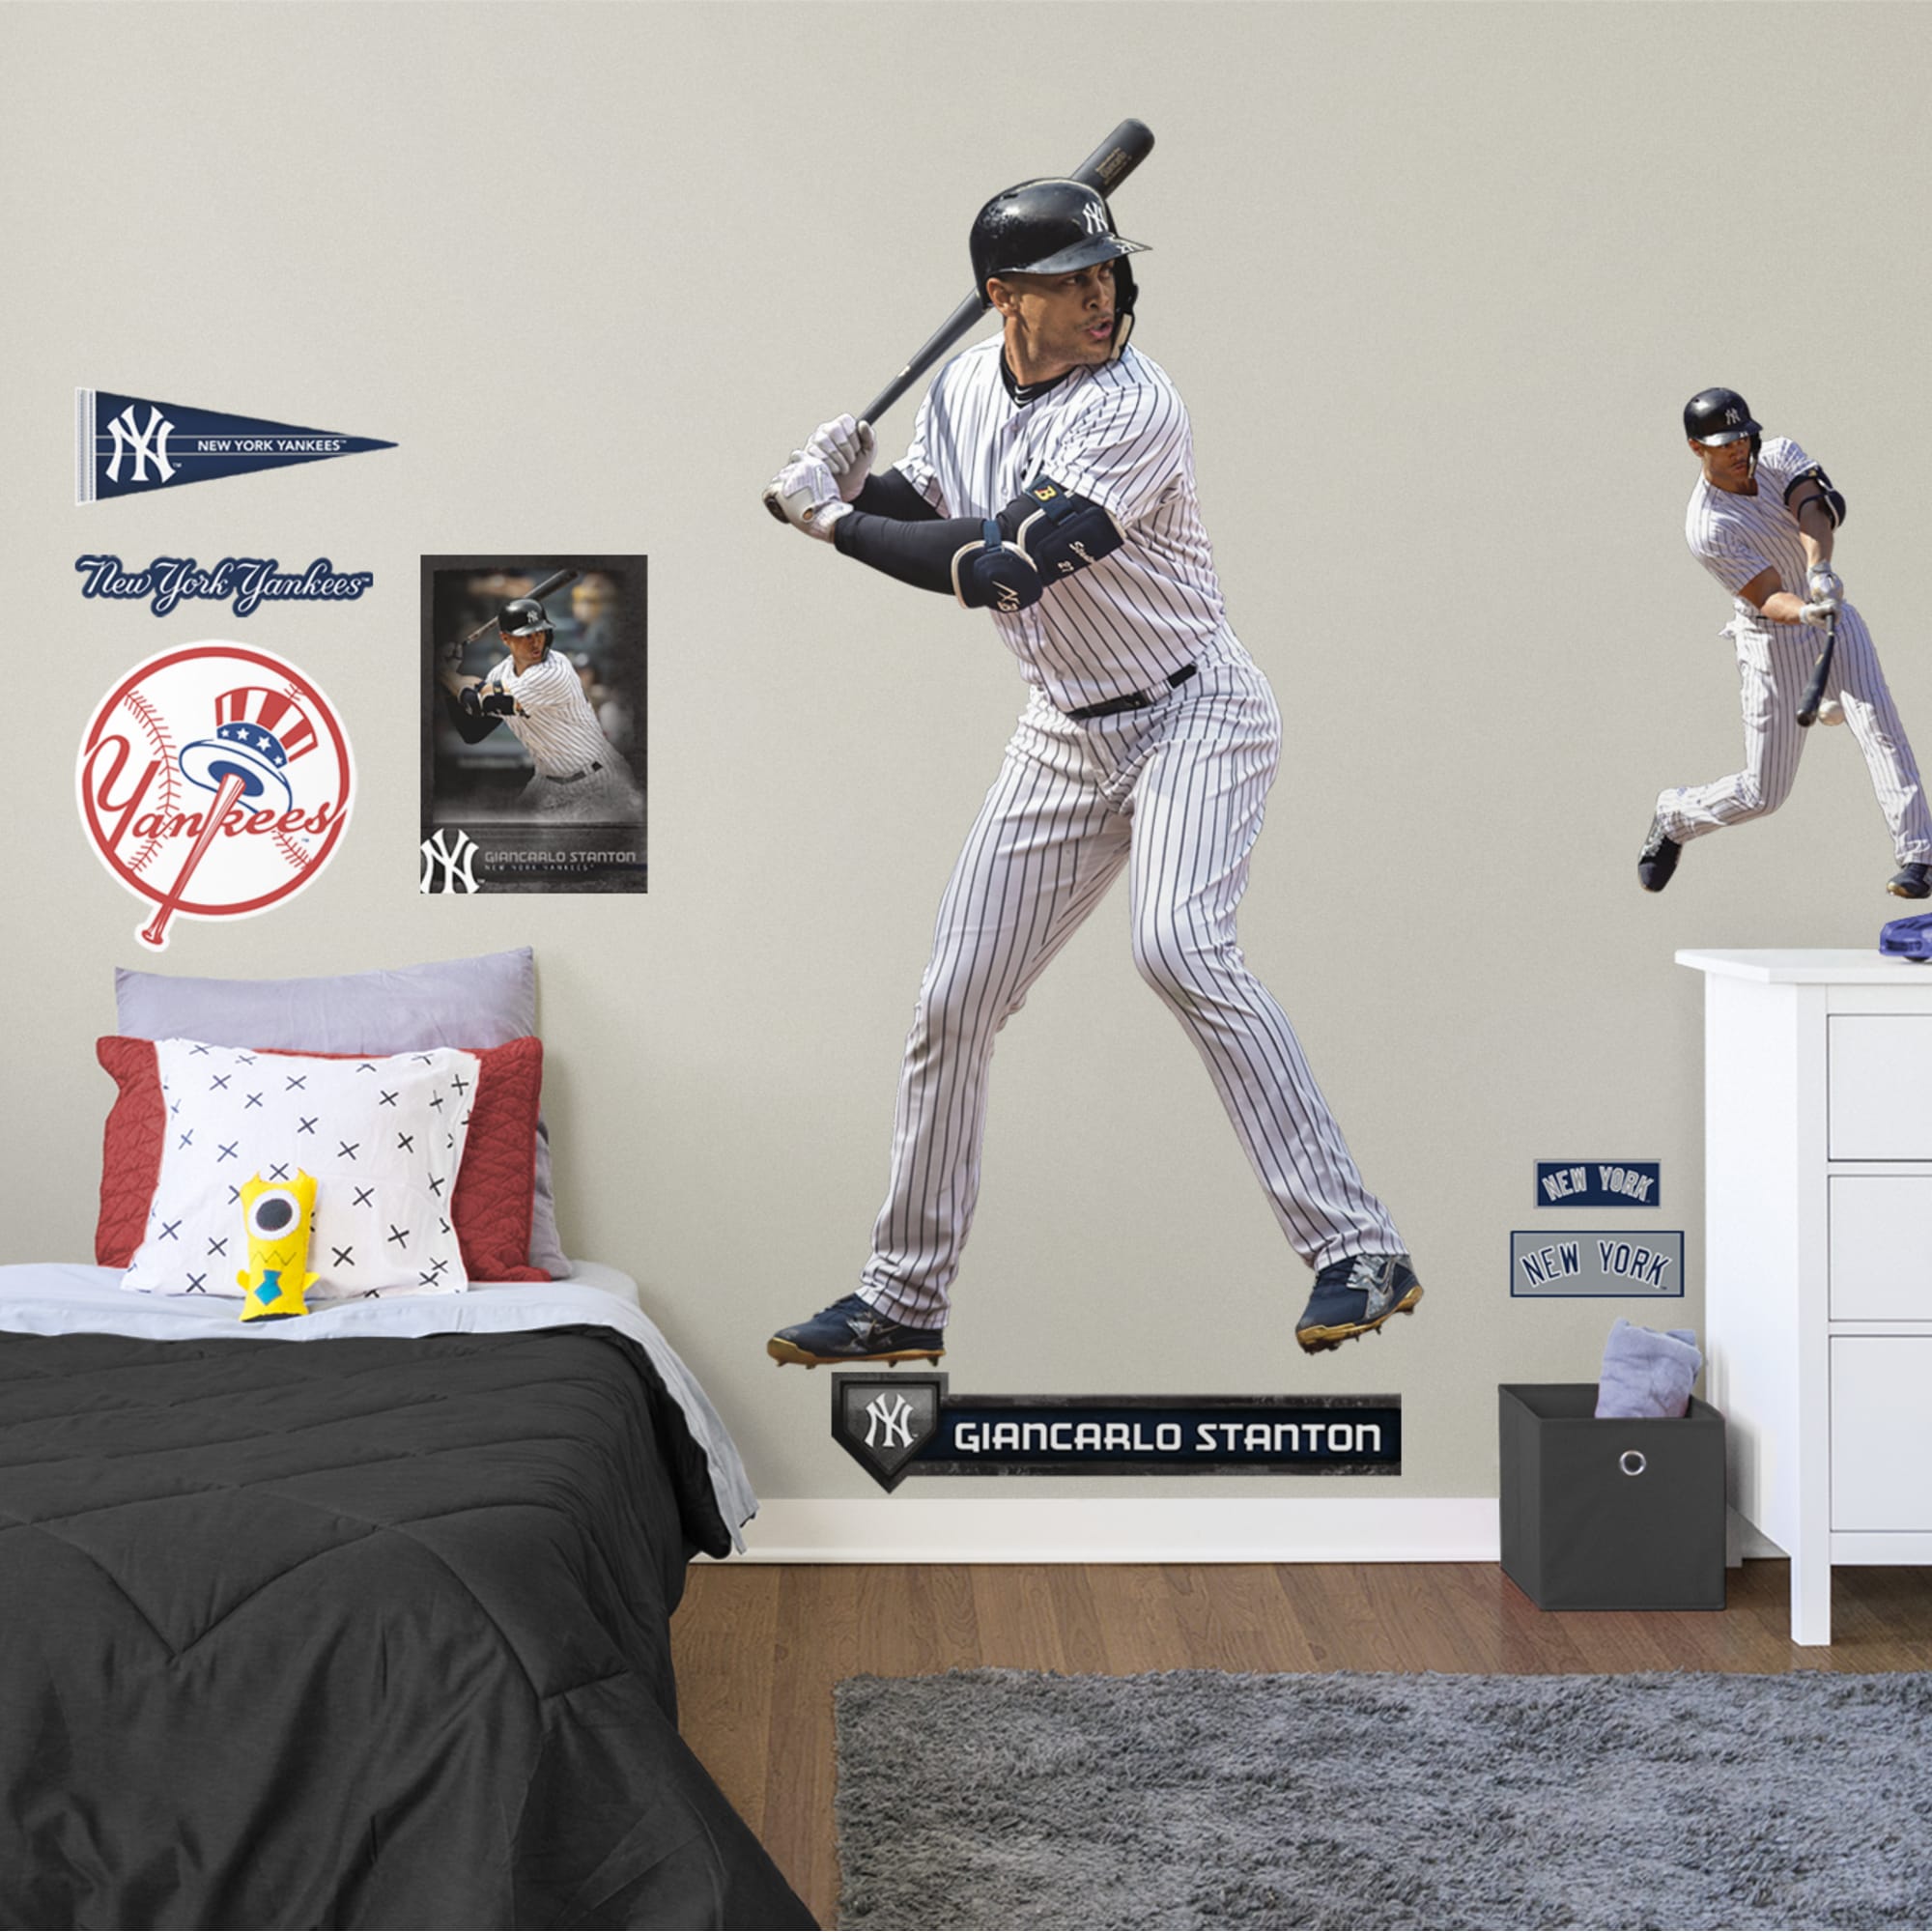 Giancarlo Stanton for New York Yankees - Officially Licensed MLB Removable Wall Decal Life-Size Athlete + 11 Decals (41"W x 78"H